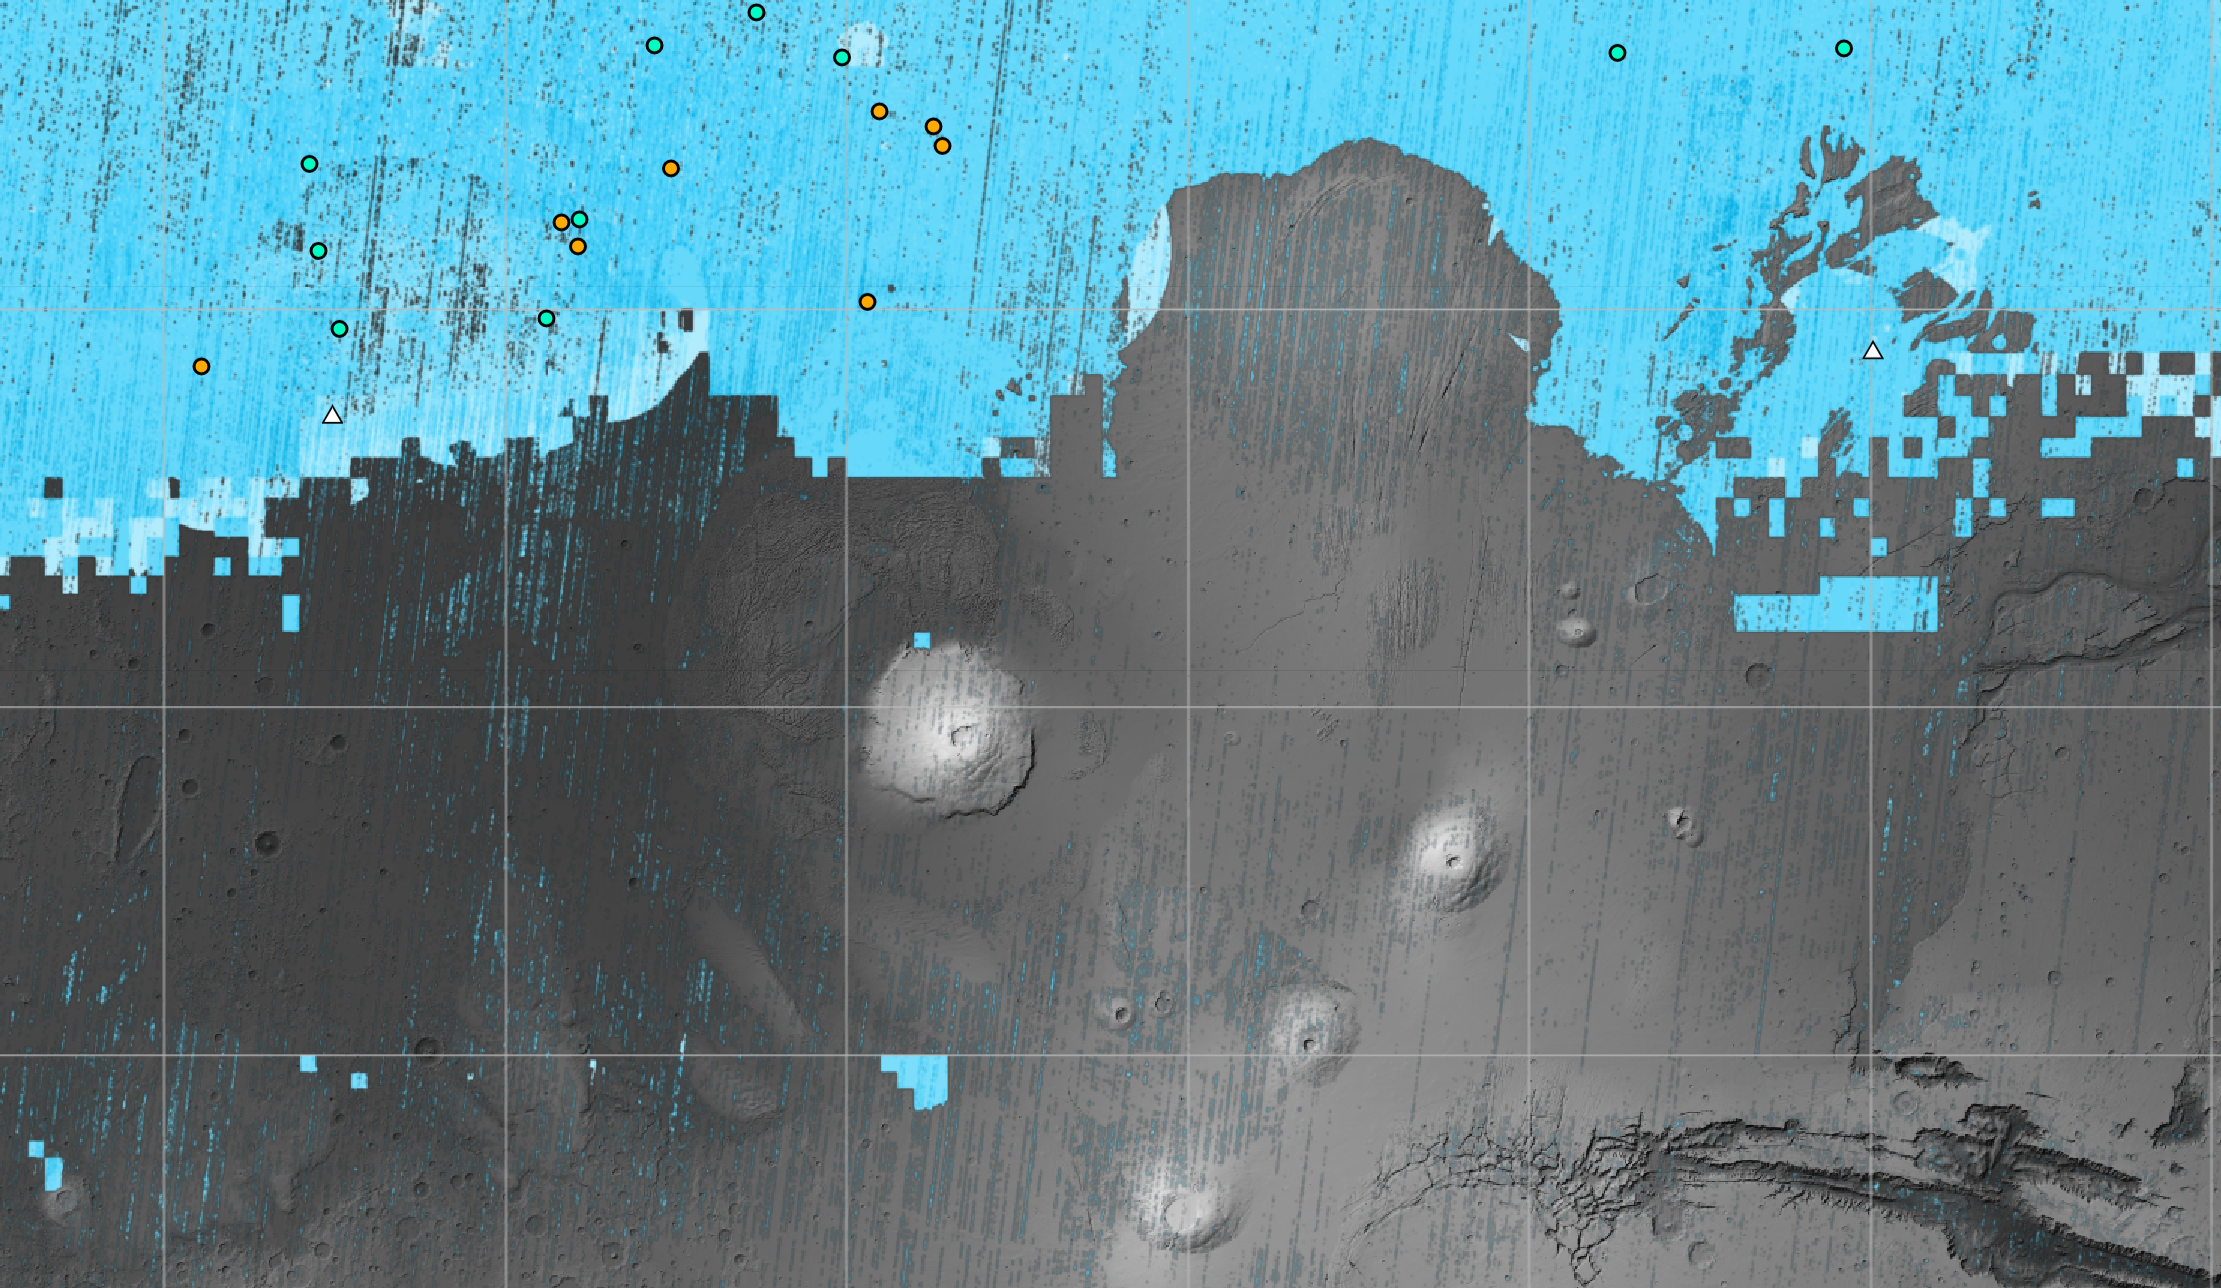 The blue areas on this map of Mars are regions where NASA missions have detected subsurface water ice (from the equator to 60 degrees north latitude).